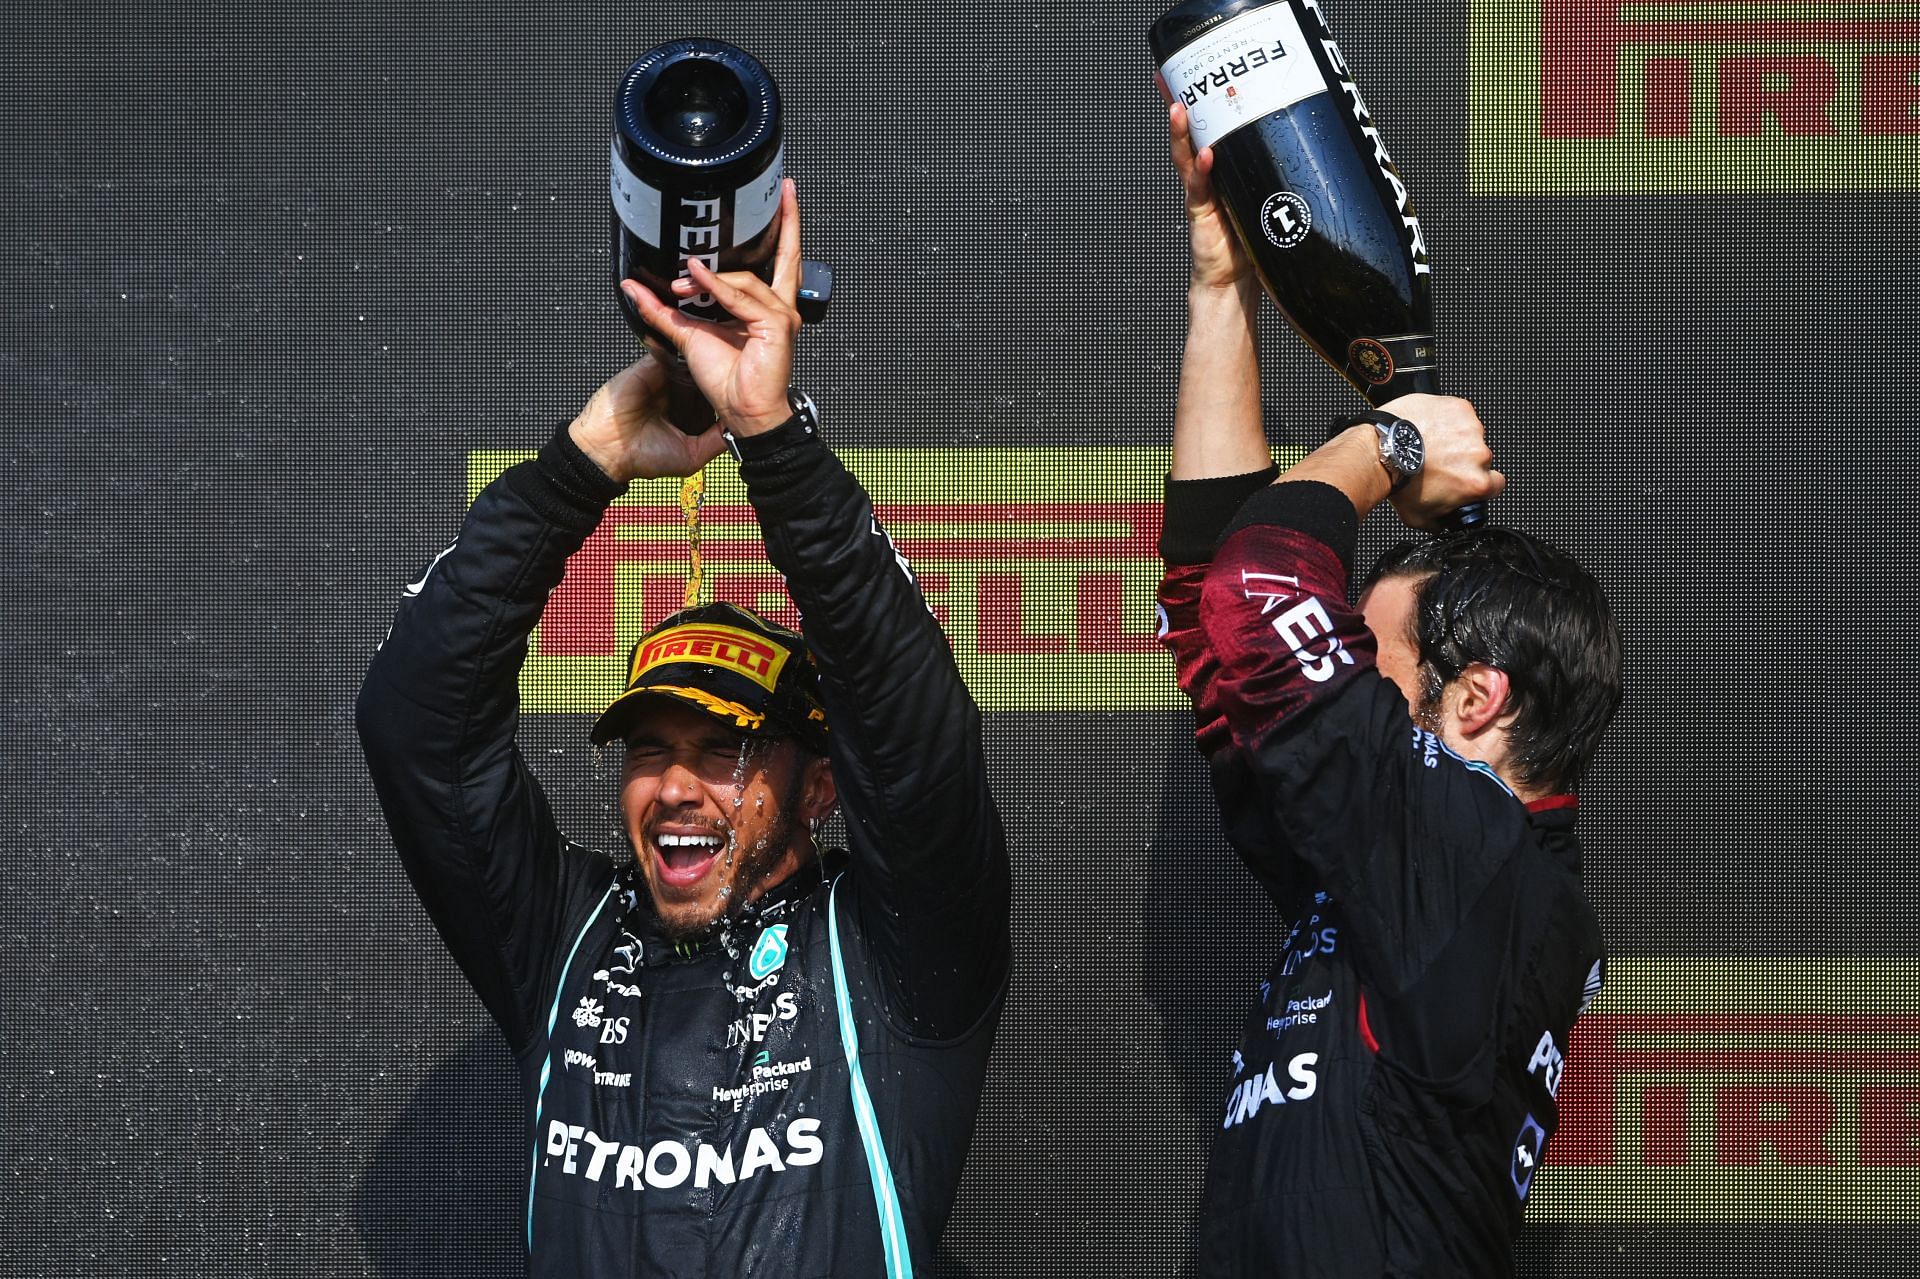 It was a Lewis Hamilton win the last time we were in Silverstone